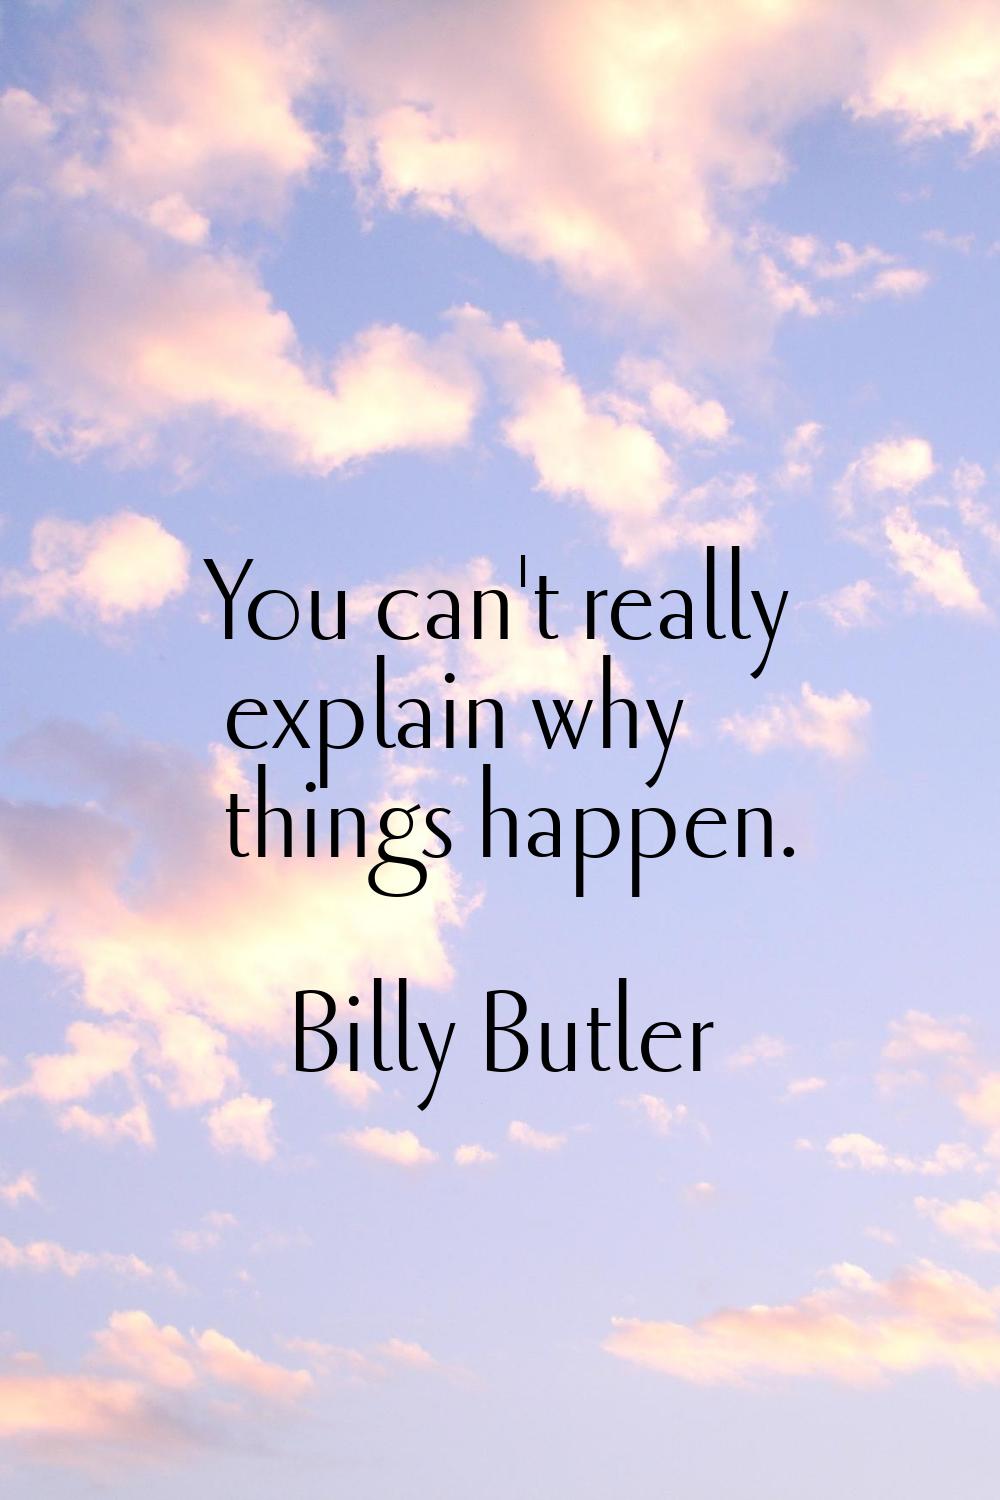 You can't really explain why things happen.